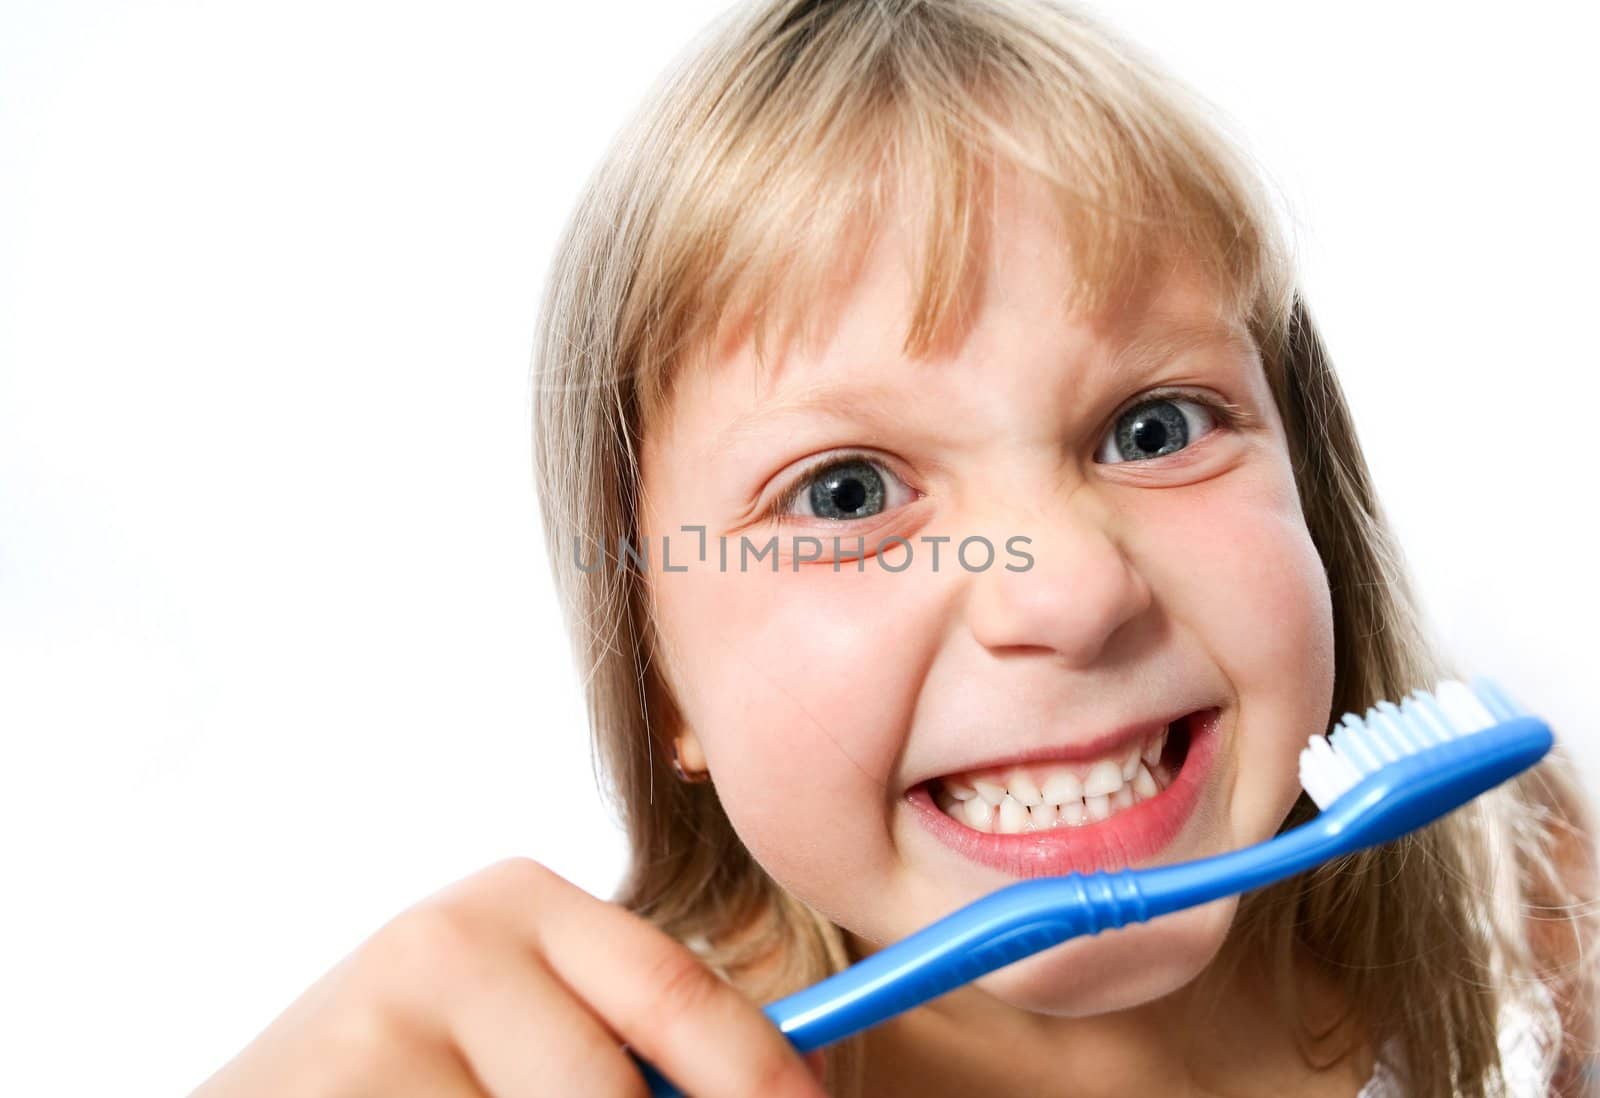 An image of little girl with toothbrush on white background